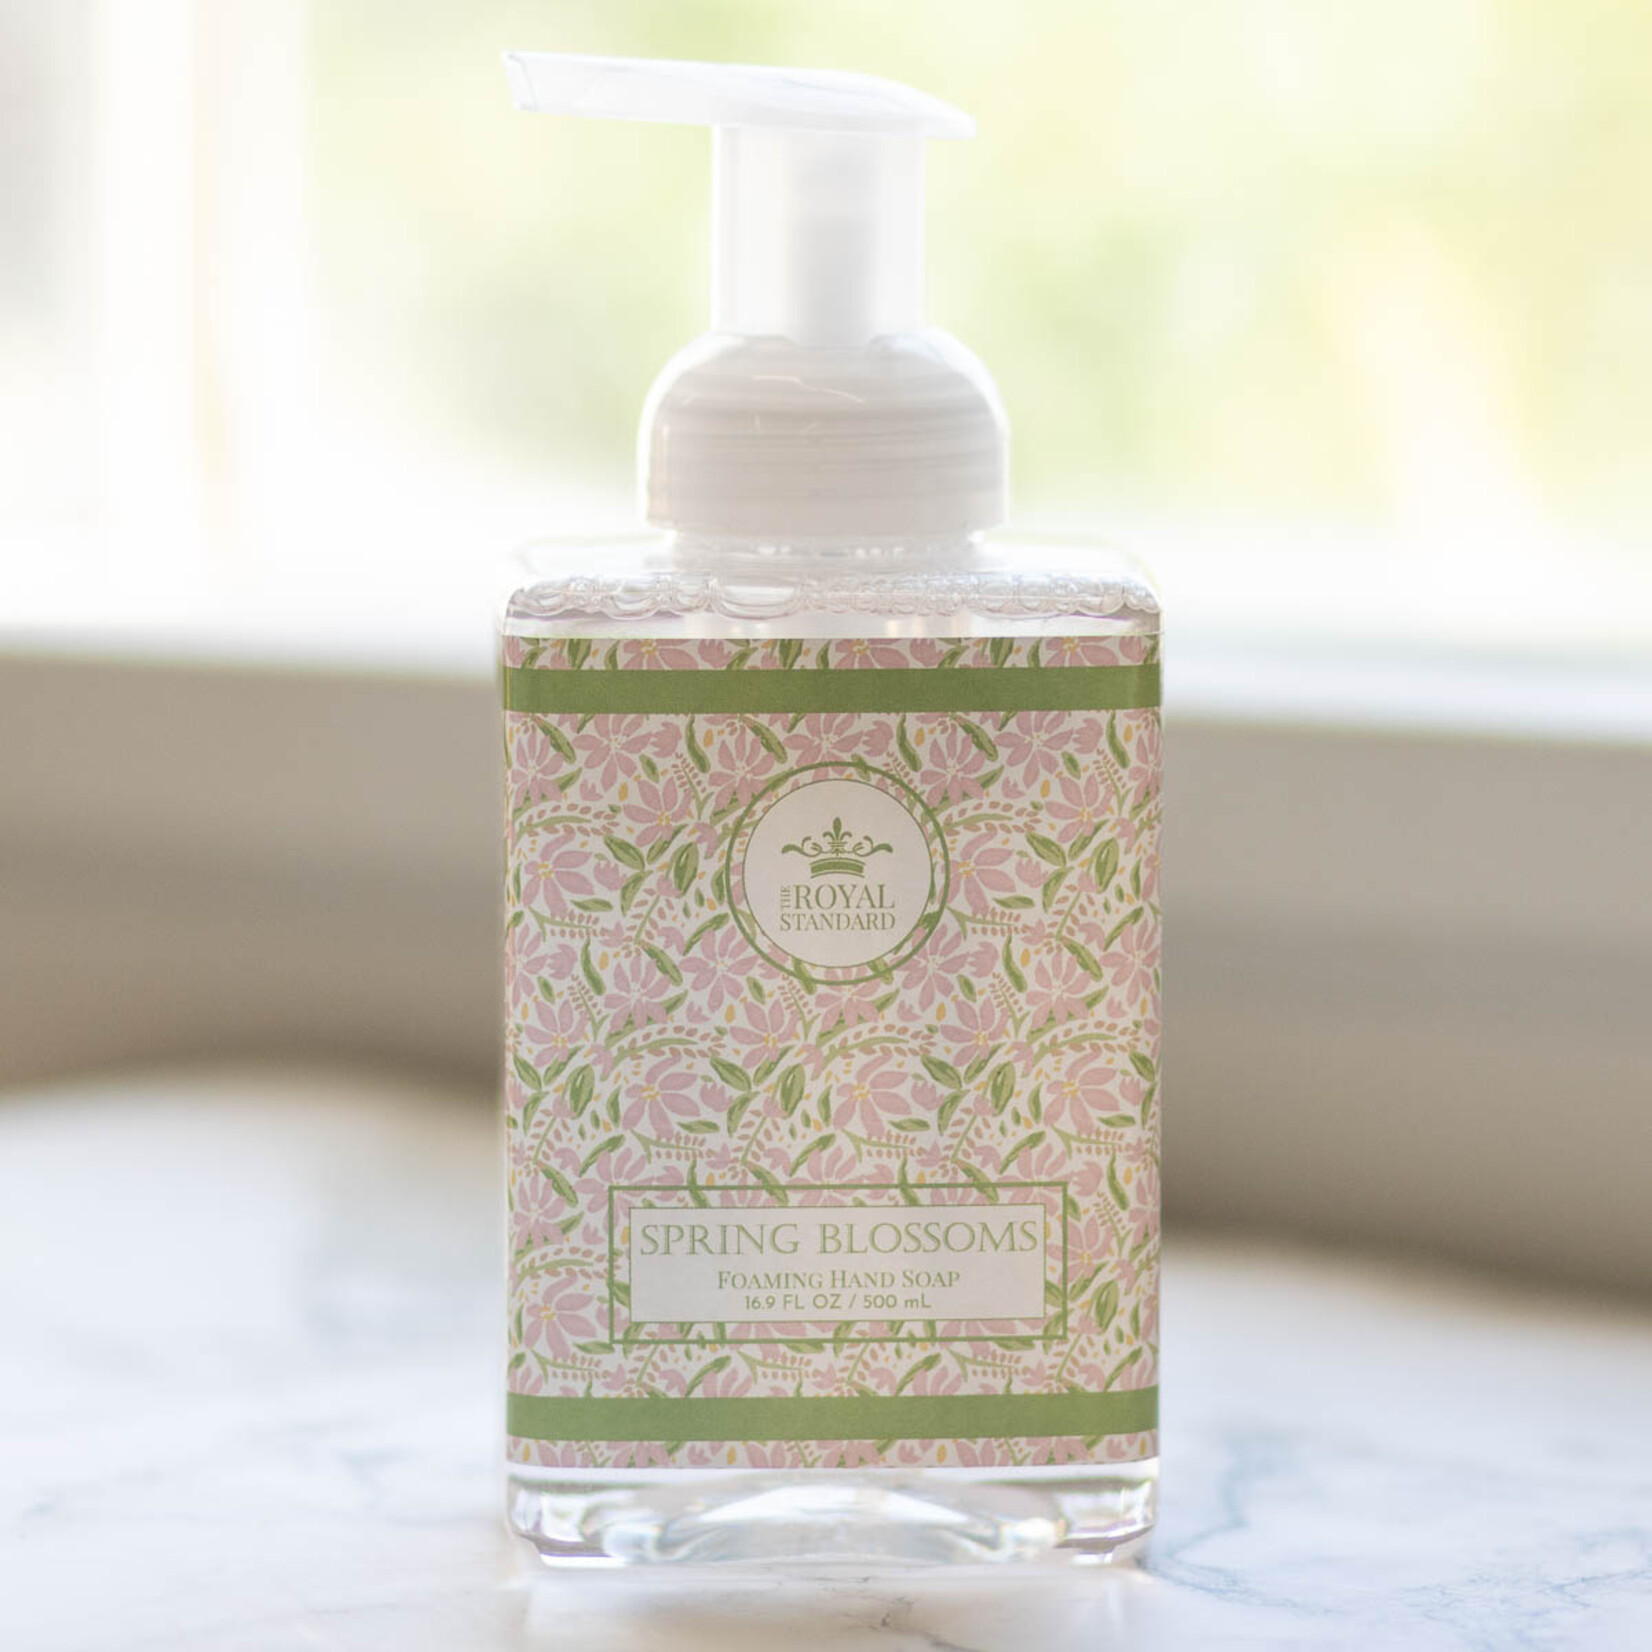 The Royal Standard Royalty Foaming Hand Soap Spring Blossom Scented